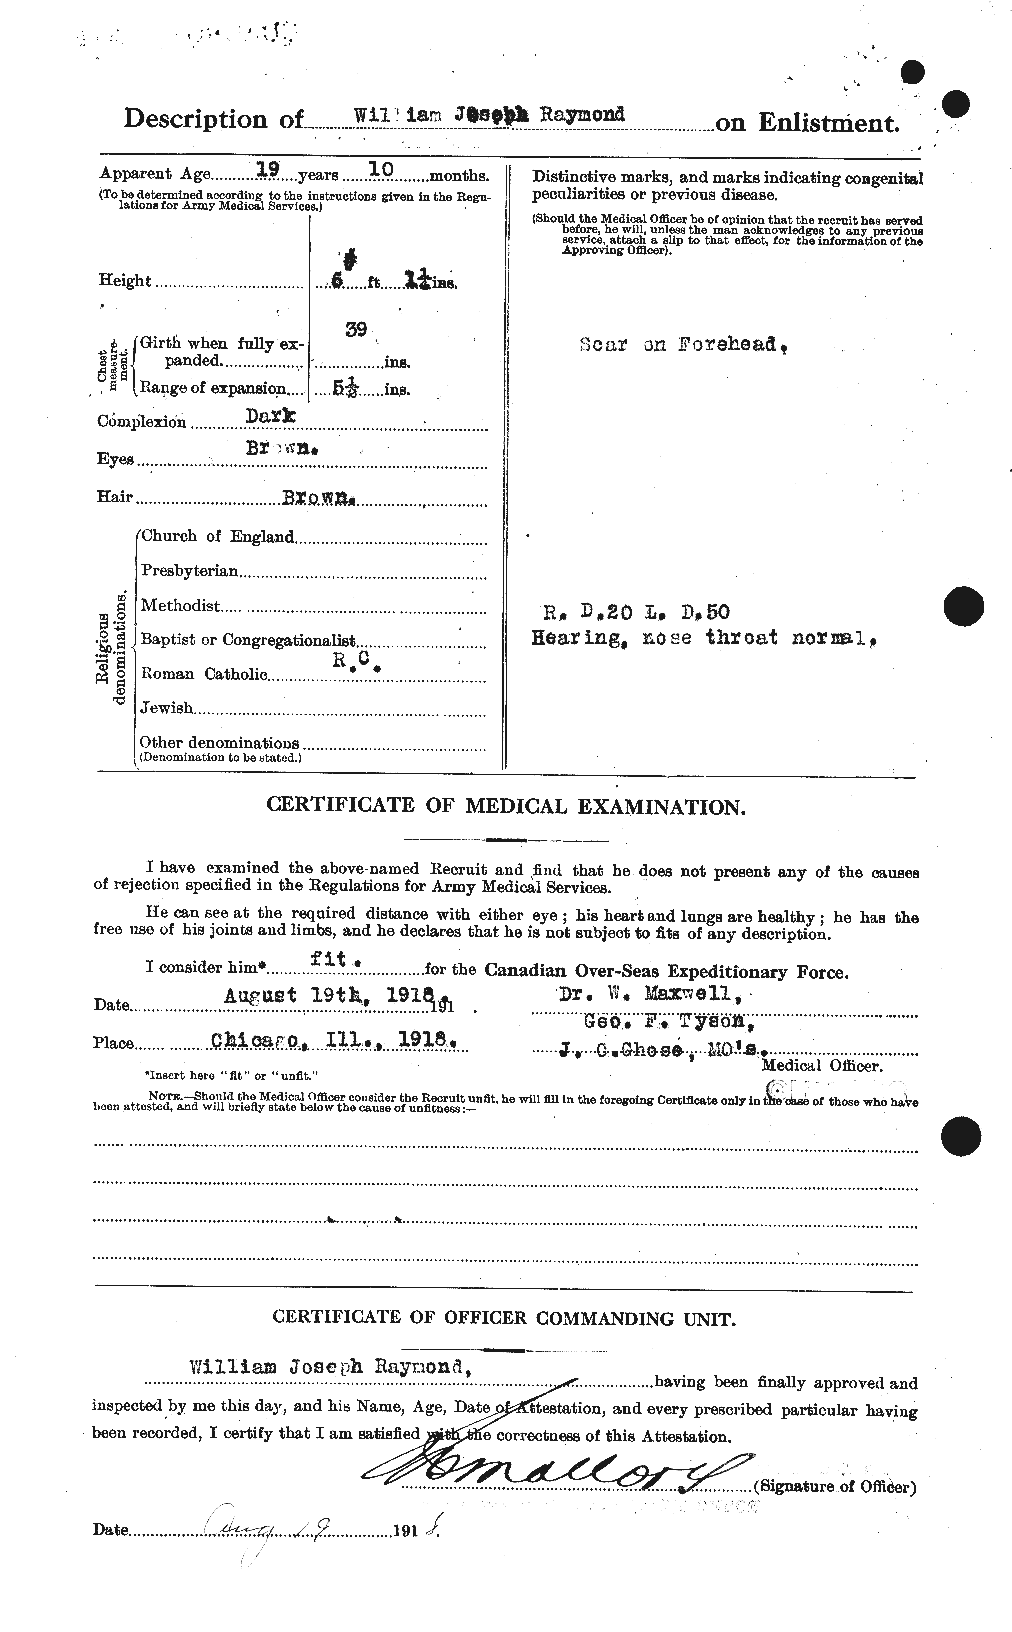 Personnel Records of the First World War - CEF 595476b